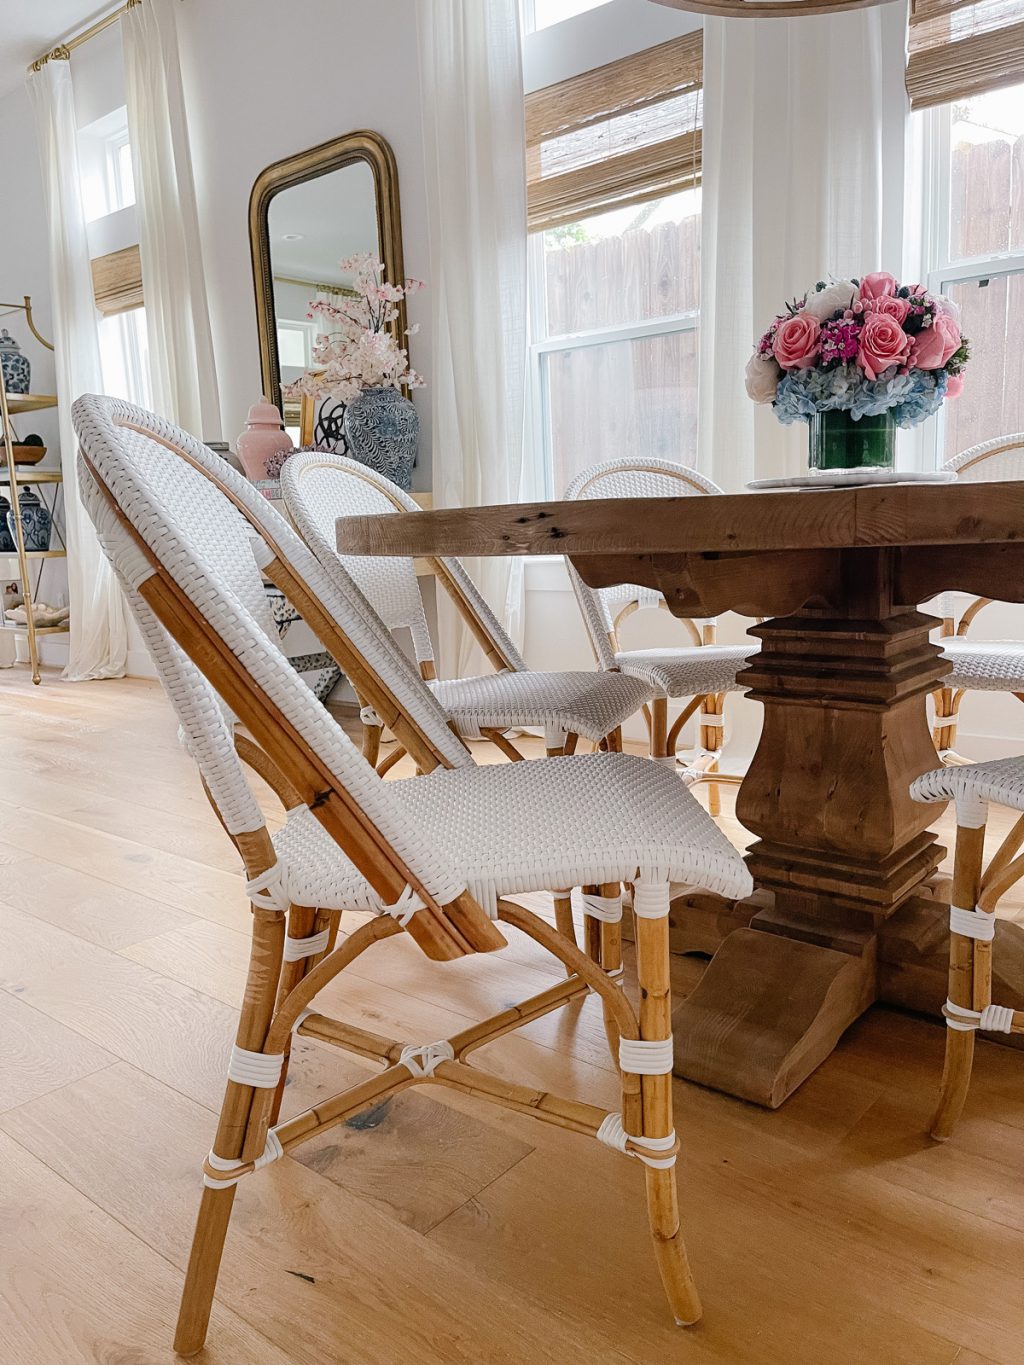 Review of Serena & Lily Riviera Chairs - Cashmere & Jeans